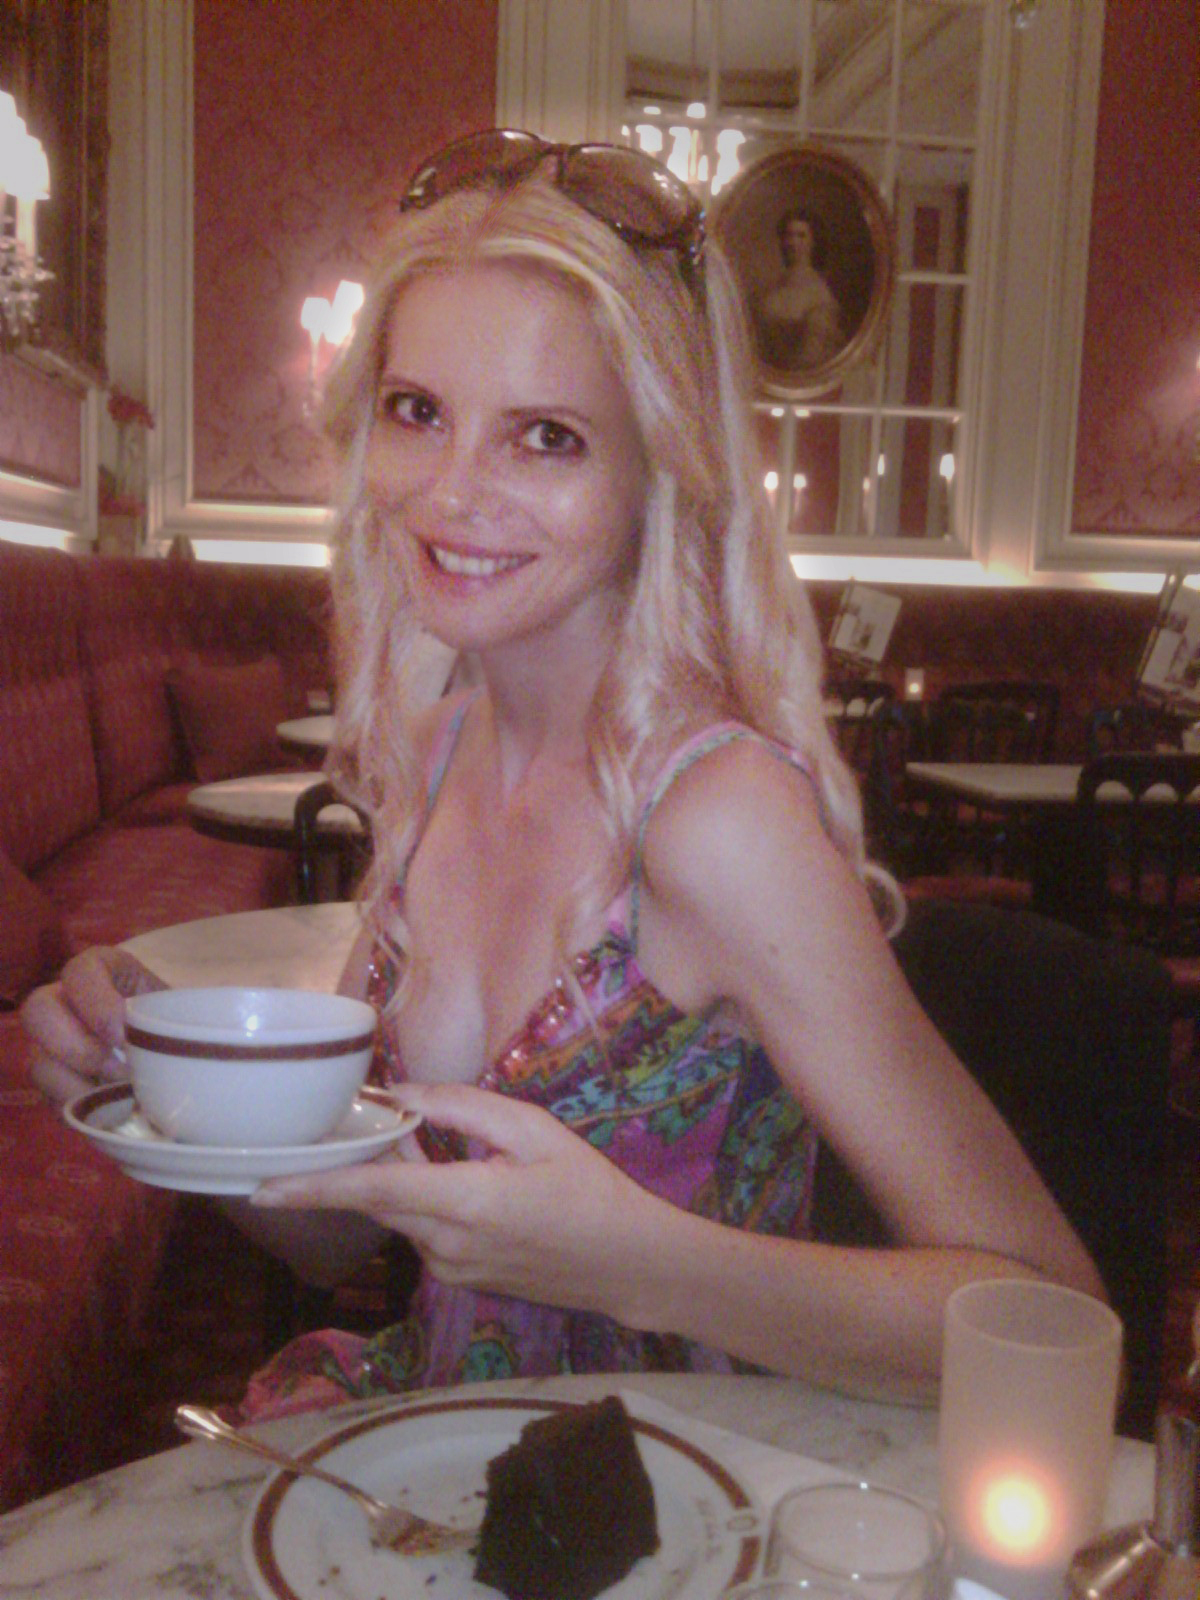 Aviana Angelique Alaïs Adell at the glamorous Hotel Sacher in Vienna